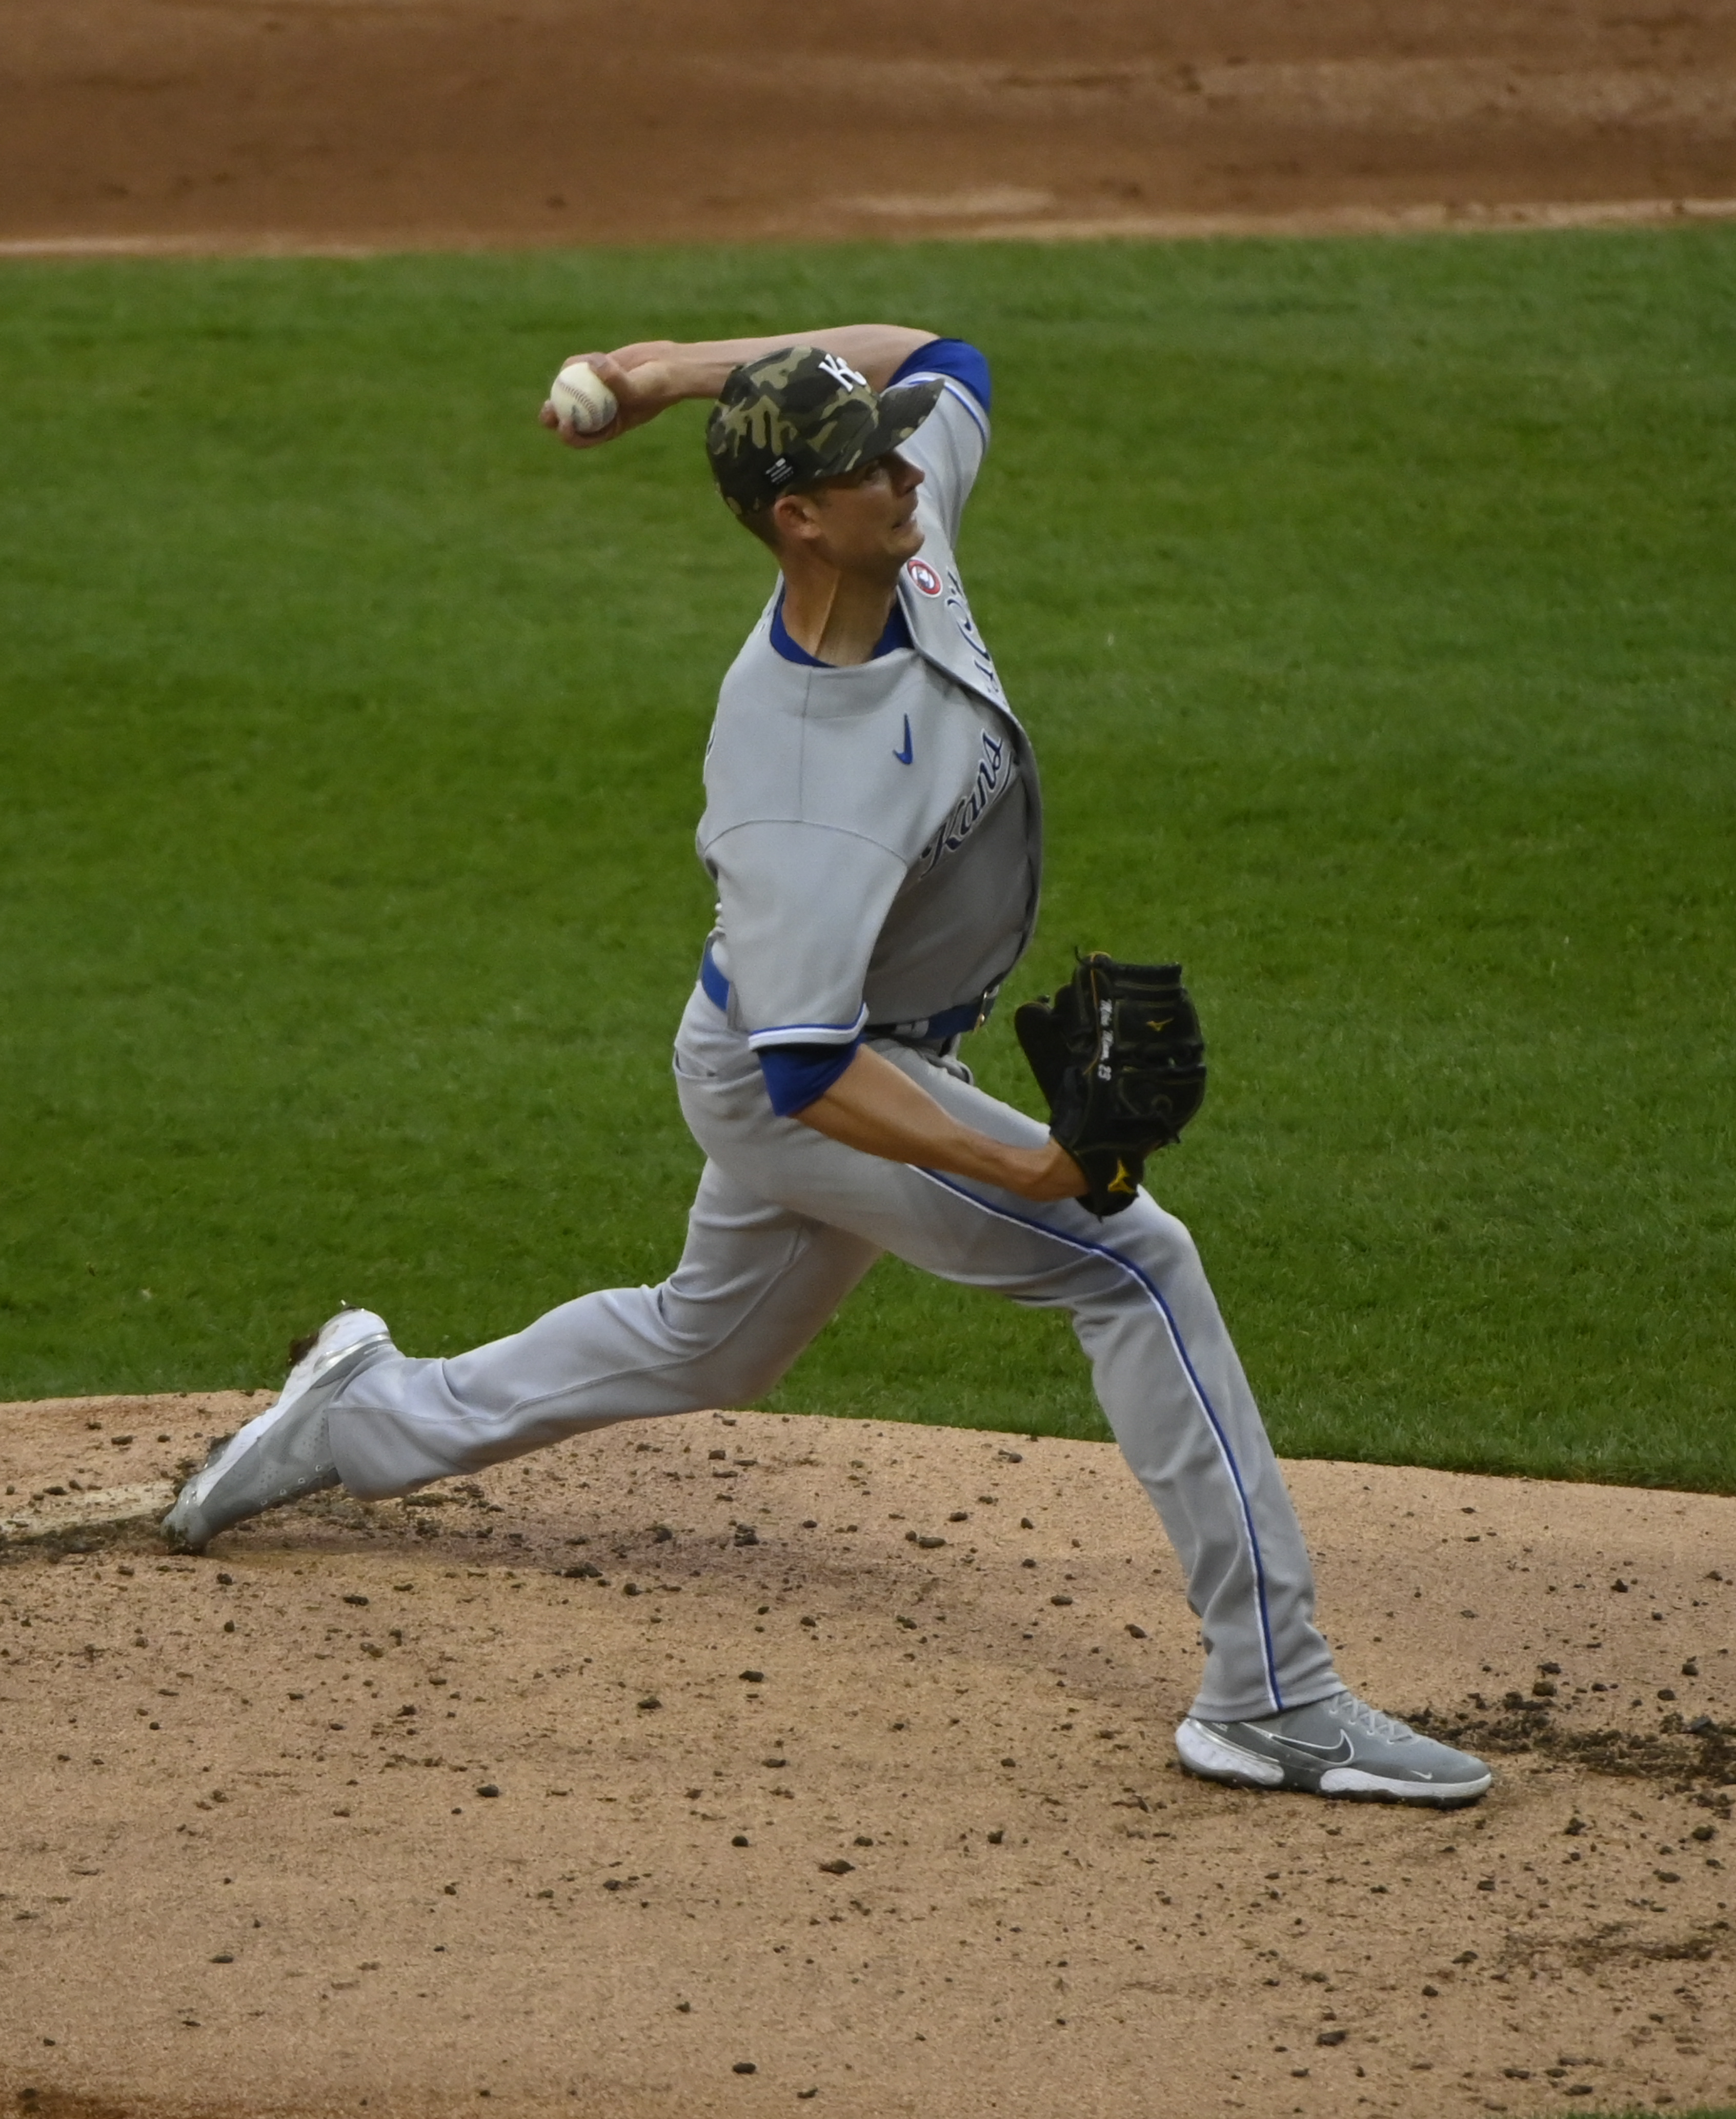 Mike Minor throws a pitch during tonight’s game